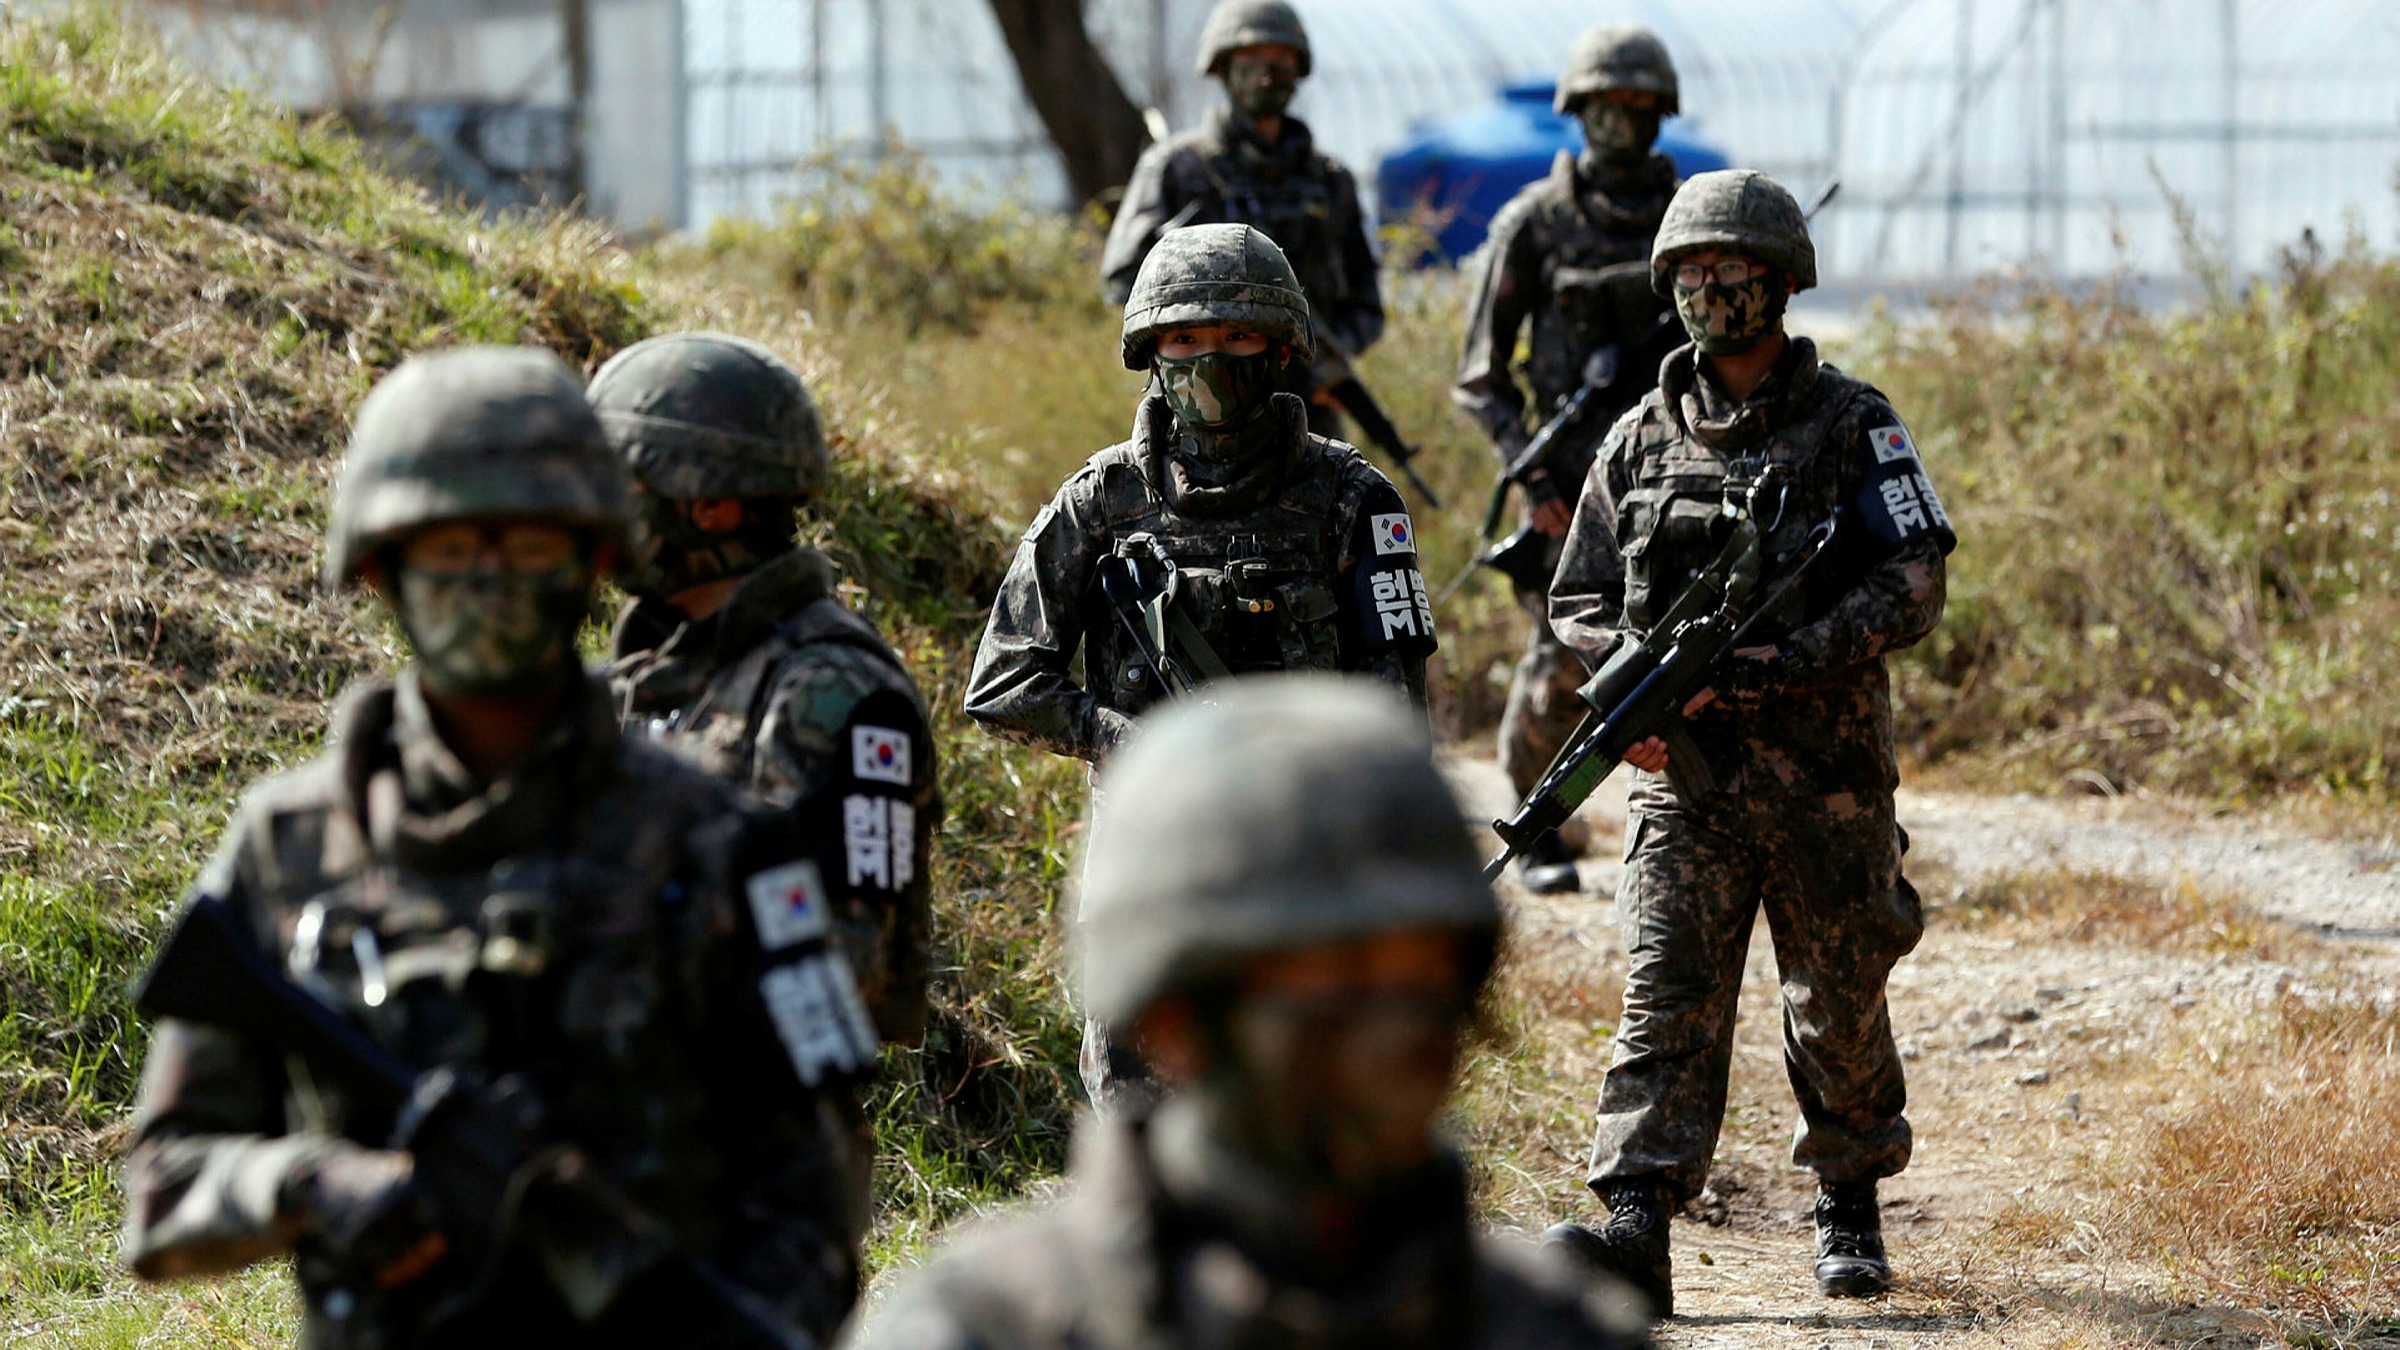 South Korea aims for military independence as Asia threats rise